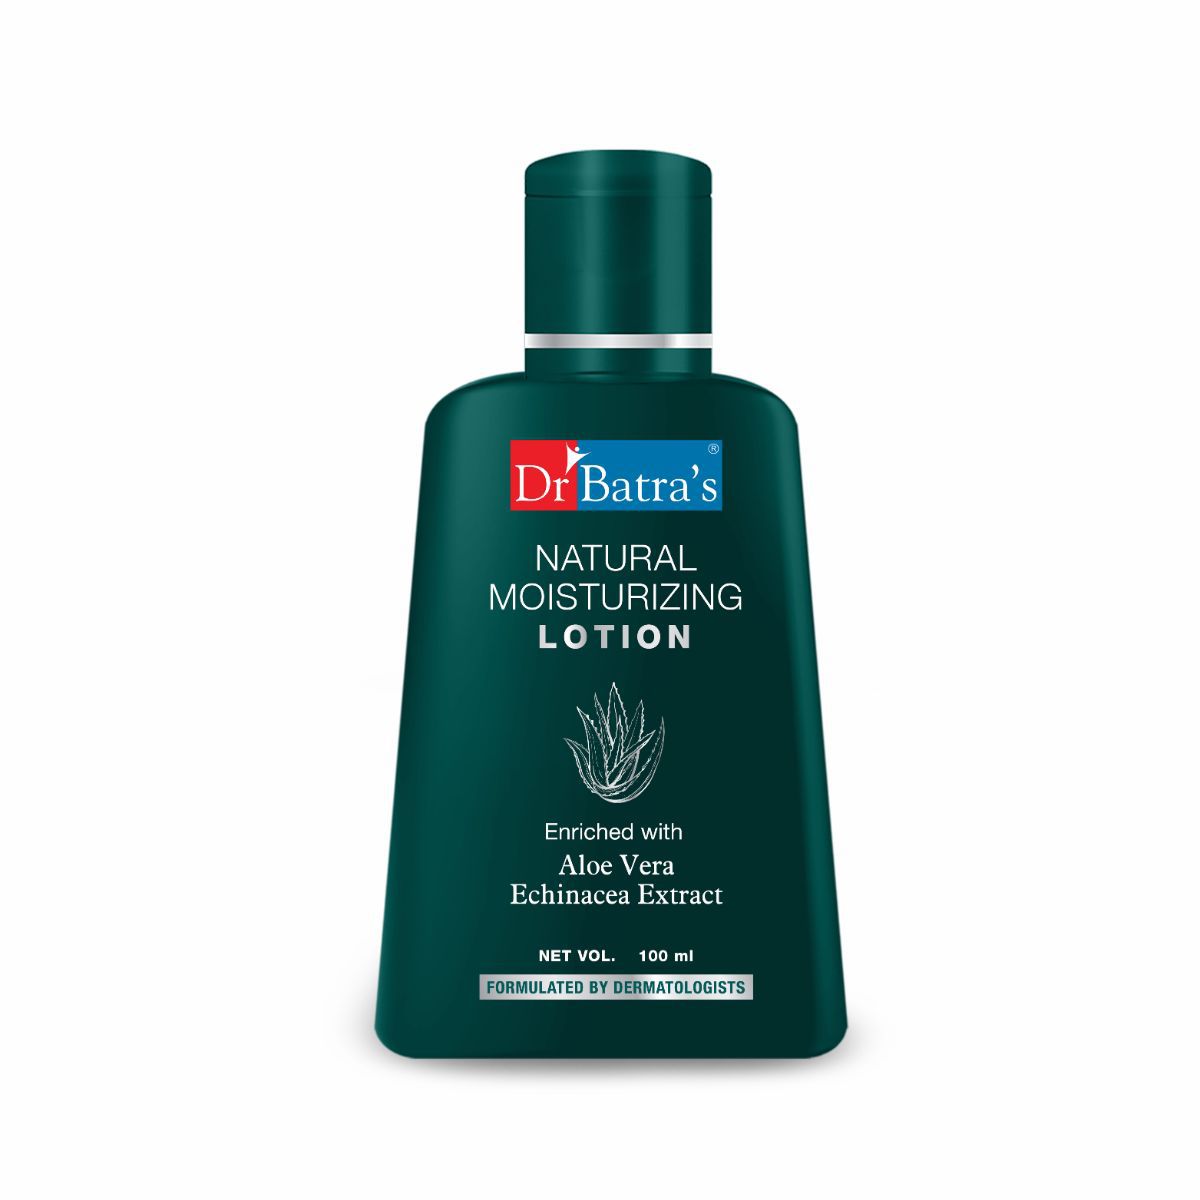     			Dr Batra's Natural Moisturizing Lotion Enriched With Echinacea Aloe Vera - 100 ml